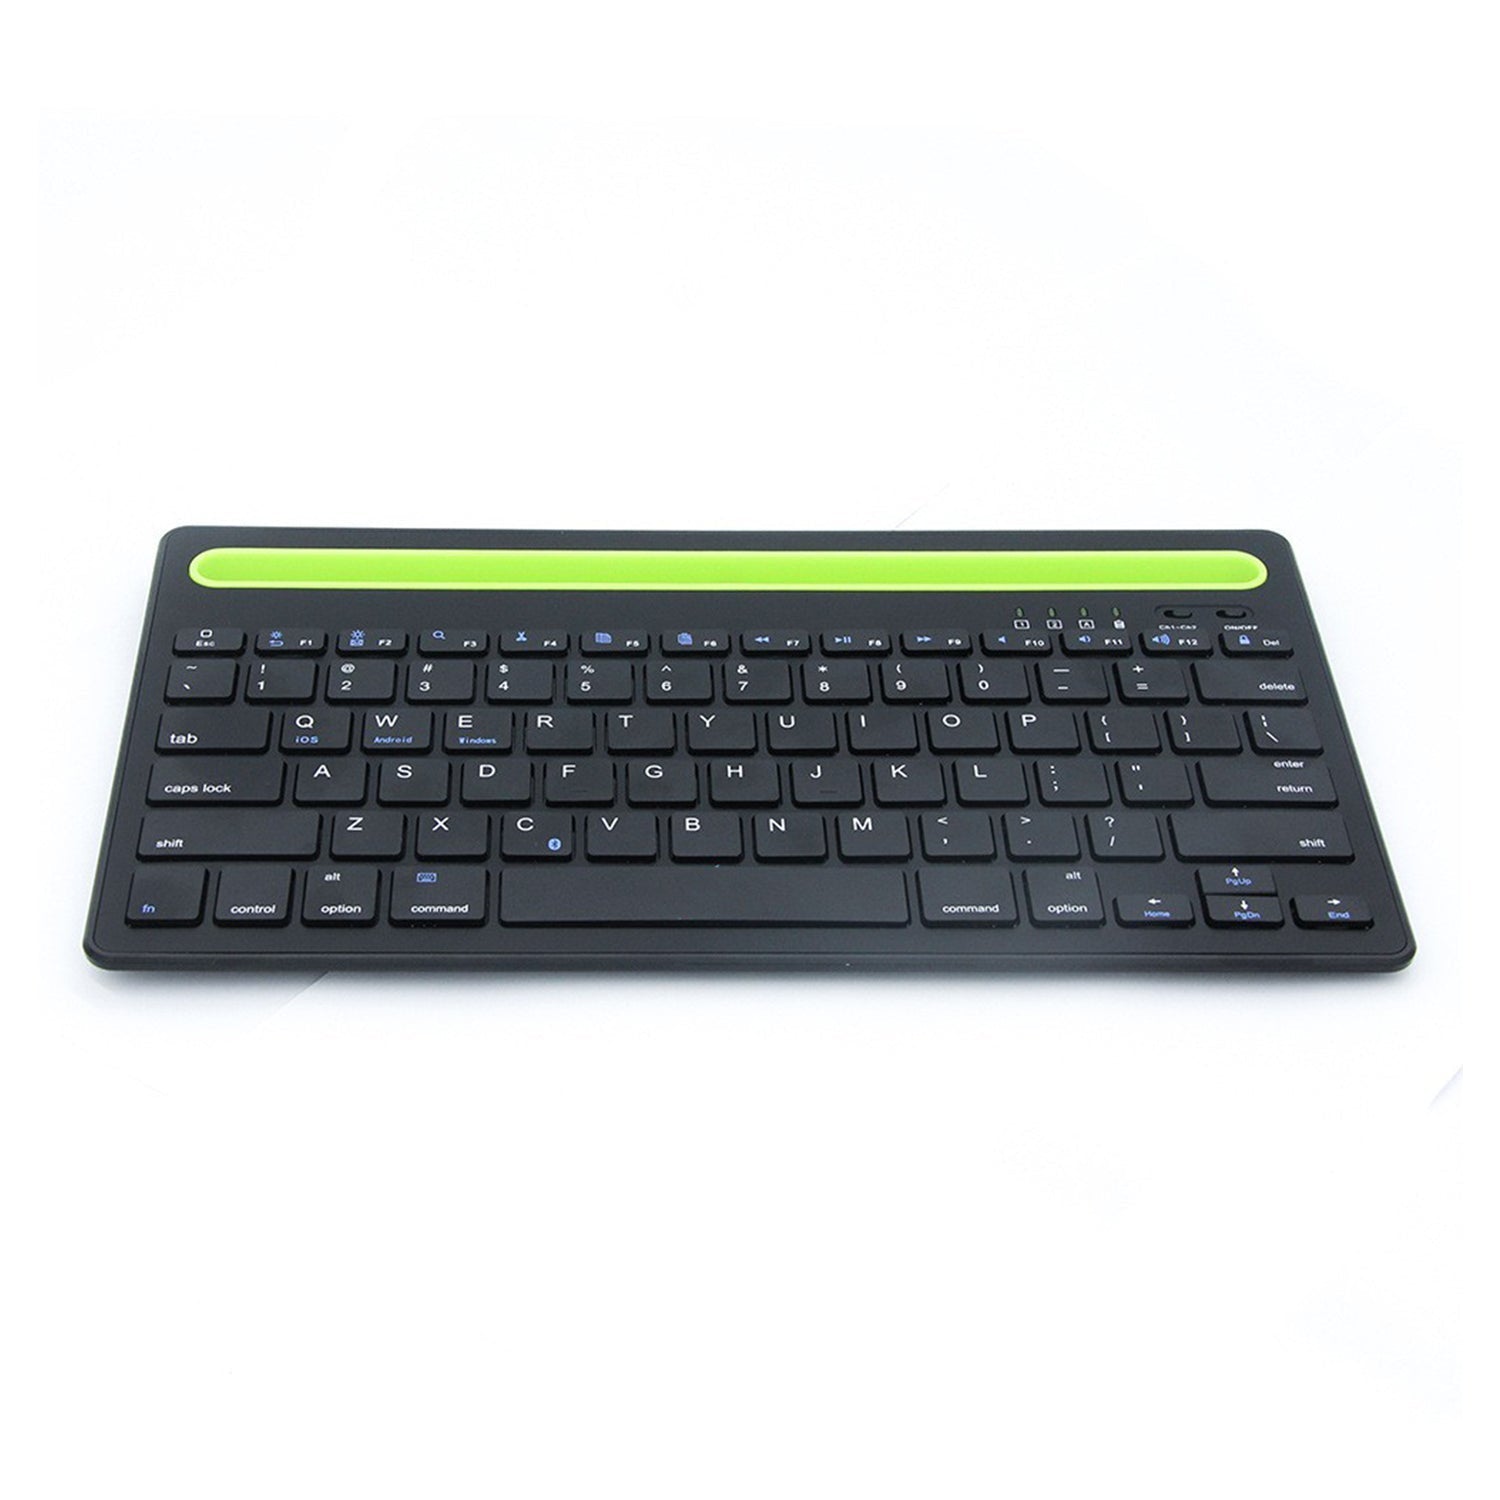 6079 Wireless Mini Keyboard for PC, tablet and phones to control them remotely.